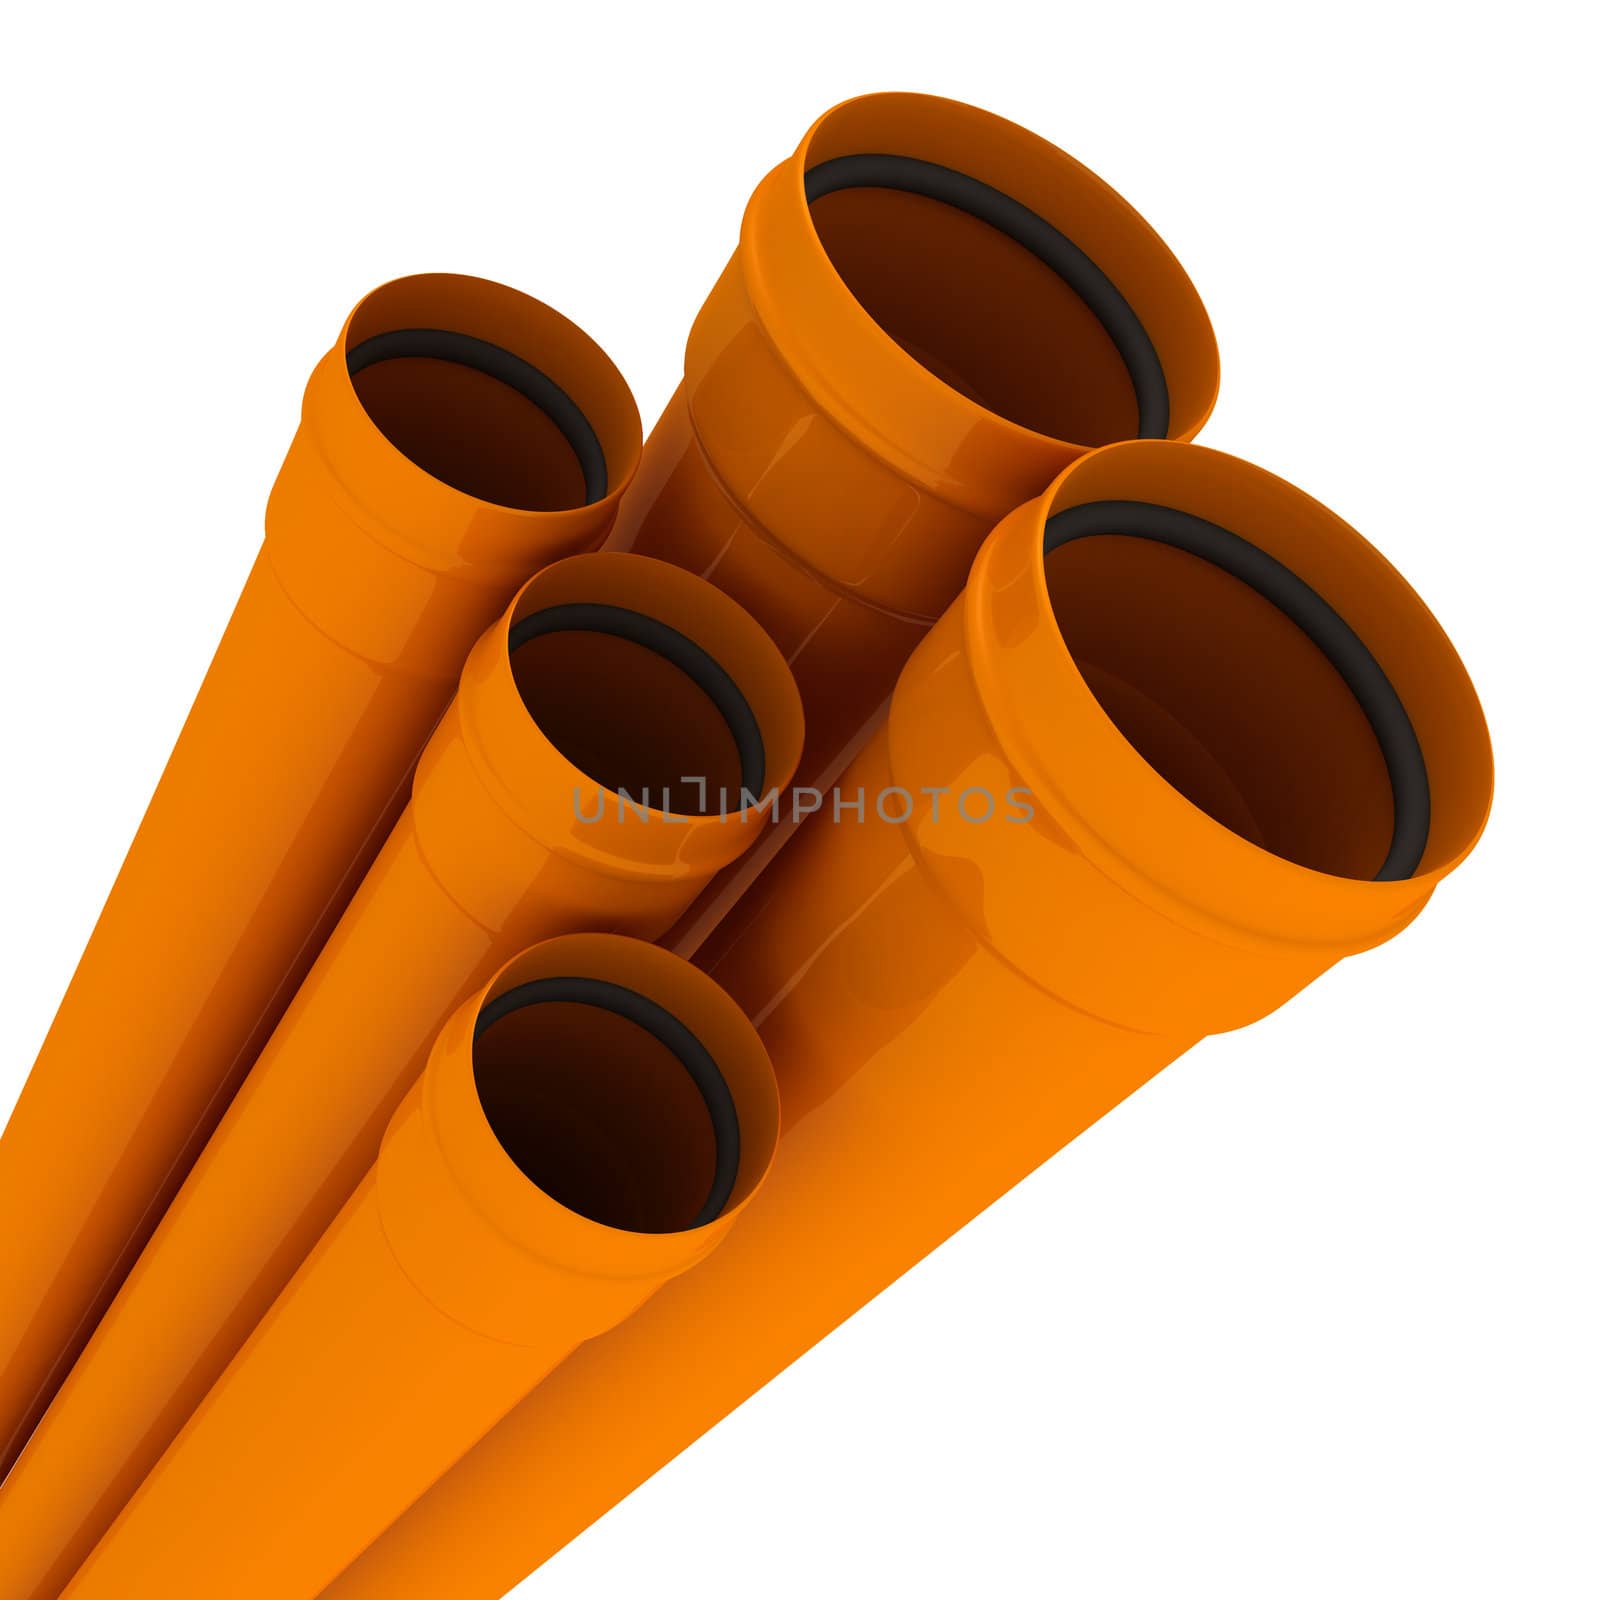 Some orange drain pipes isolated on white